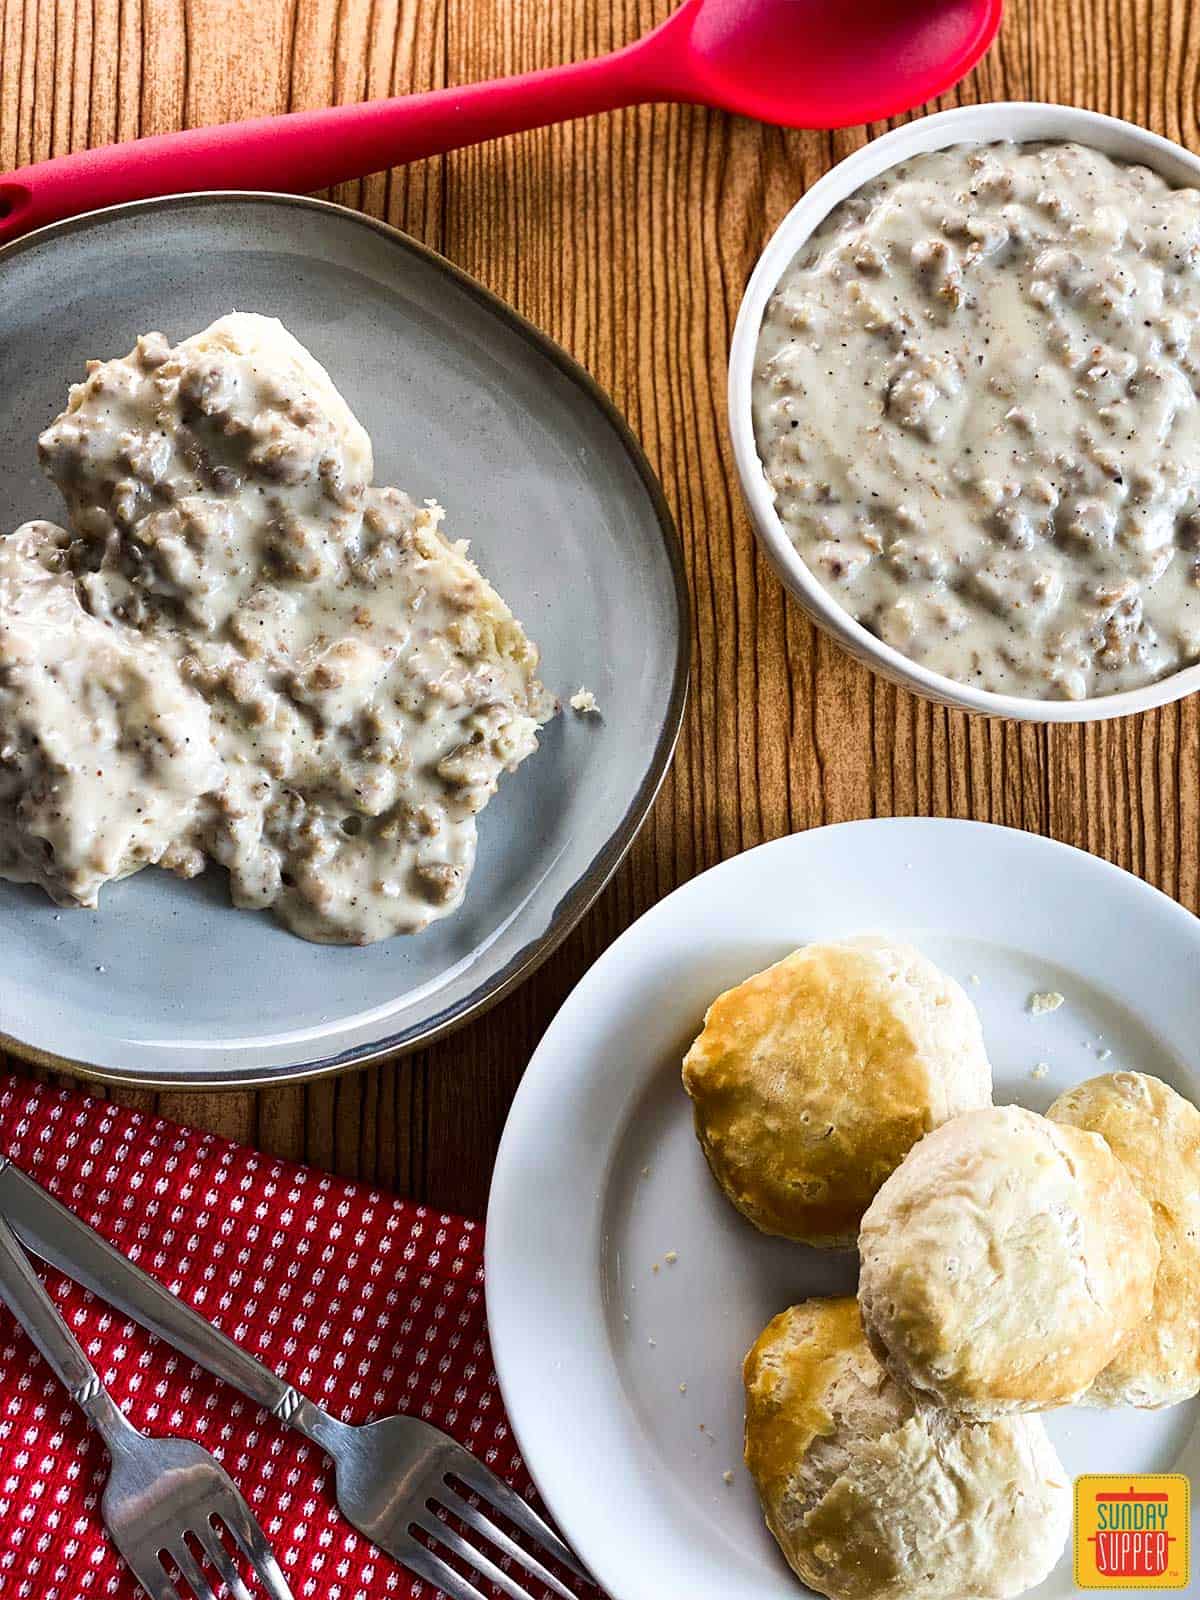 Instant pot sausage gravy in a bowl and on biscuits on a plate with plain biscuits on a plate next to it